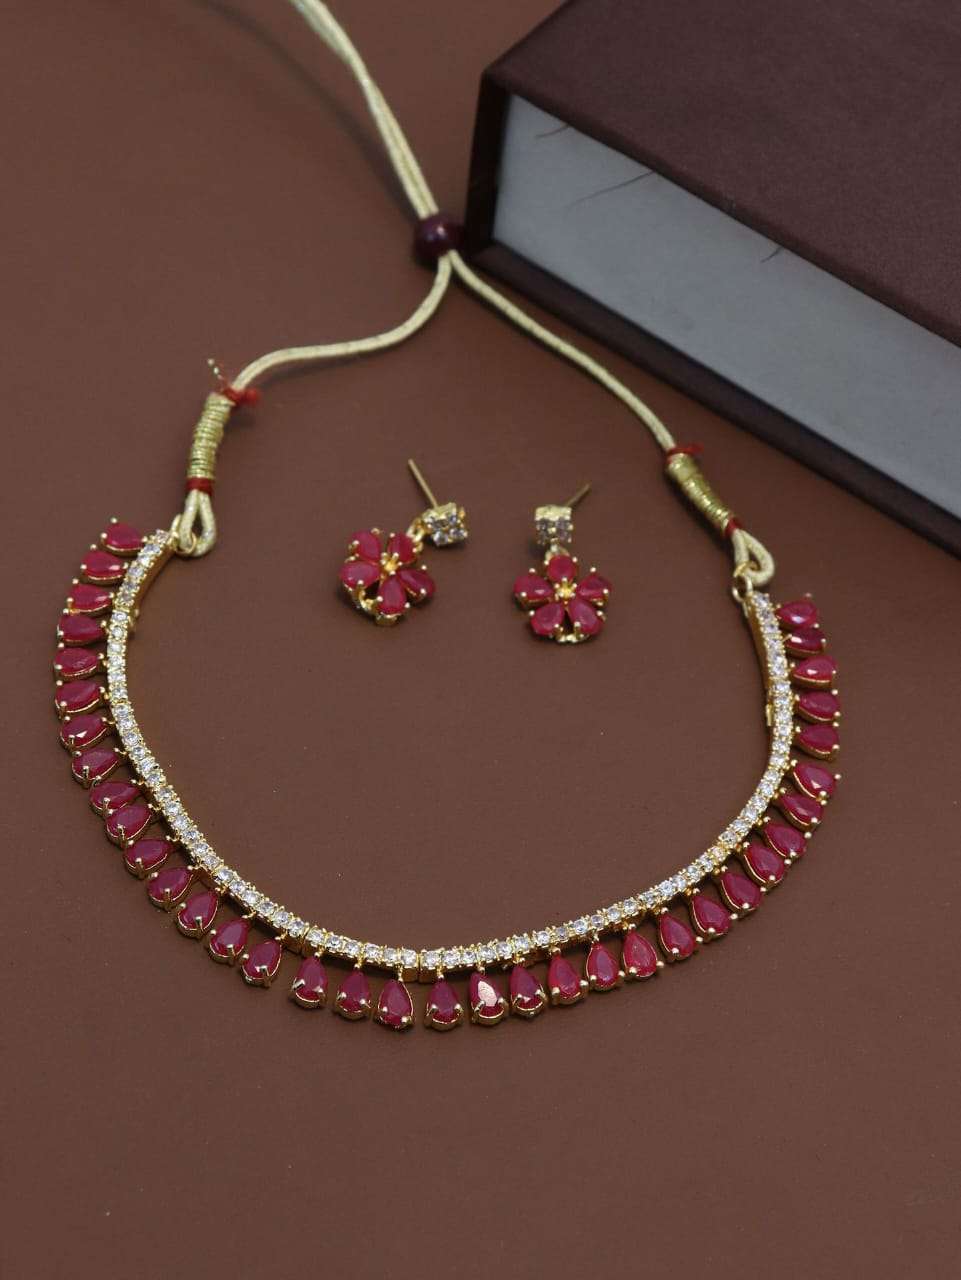 S-319 BY FASHID WHOLESALE TRADITIONAL IMITATION JEWELLERY FOR INDIAN ATTIRE AT EXCLUSIVE RANGE.